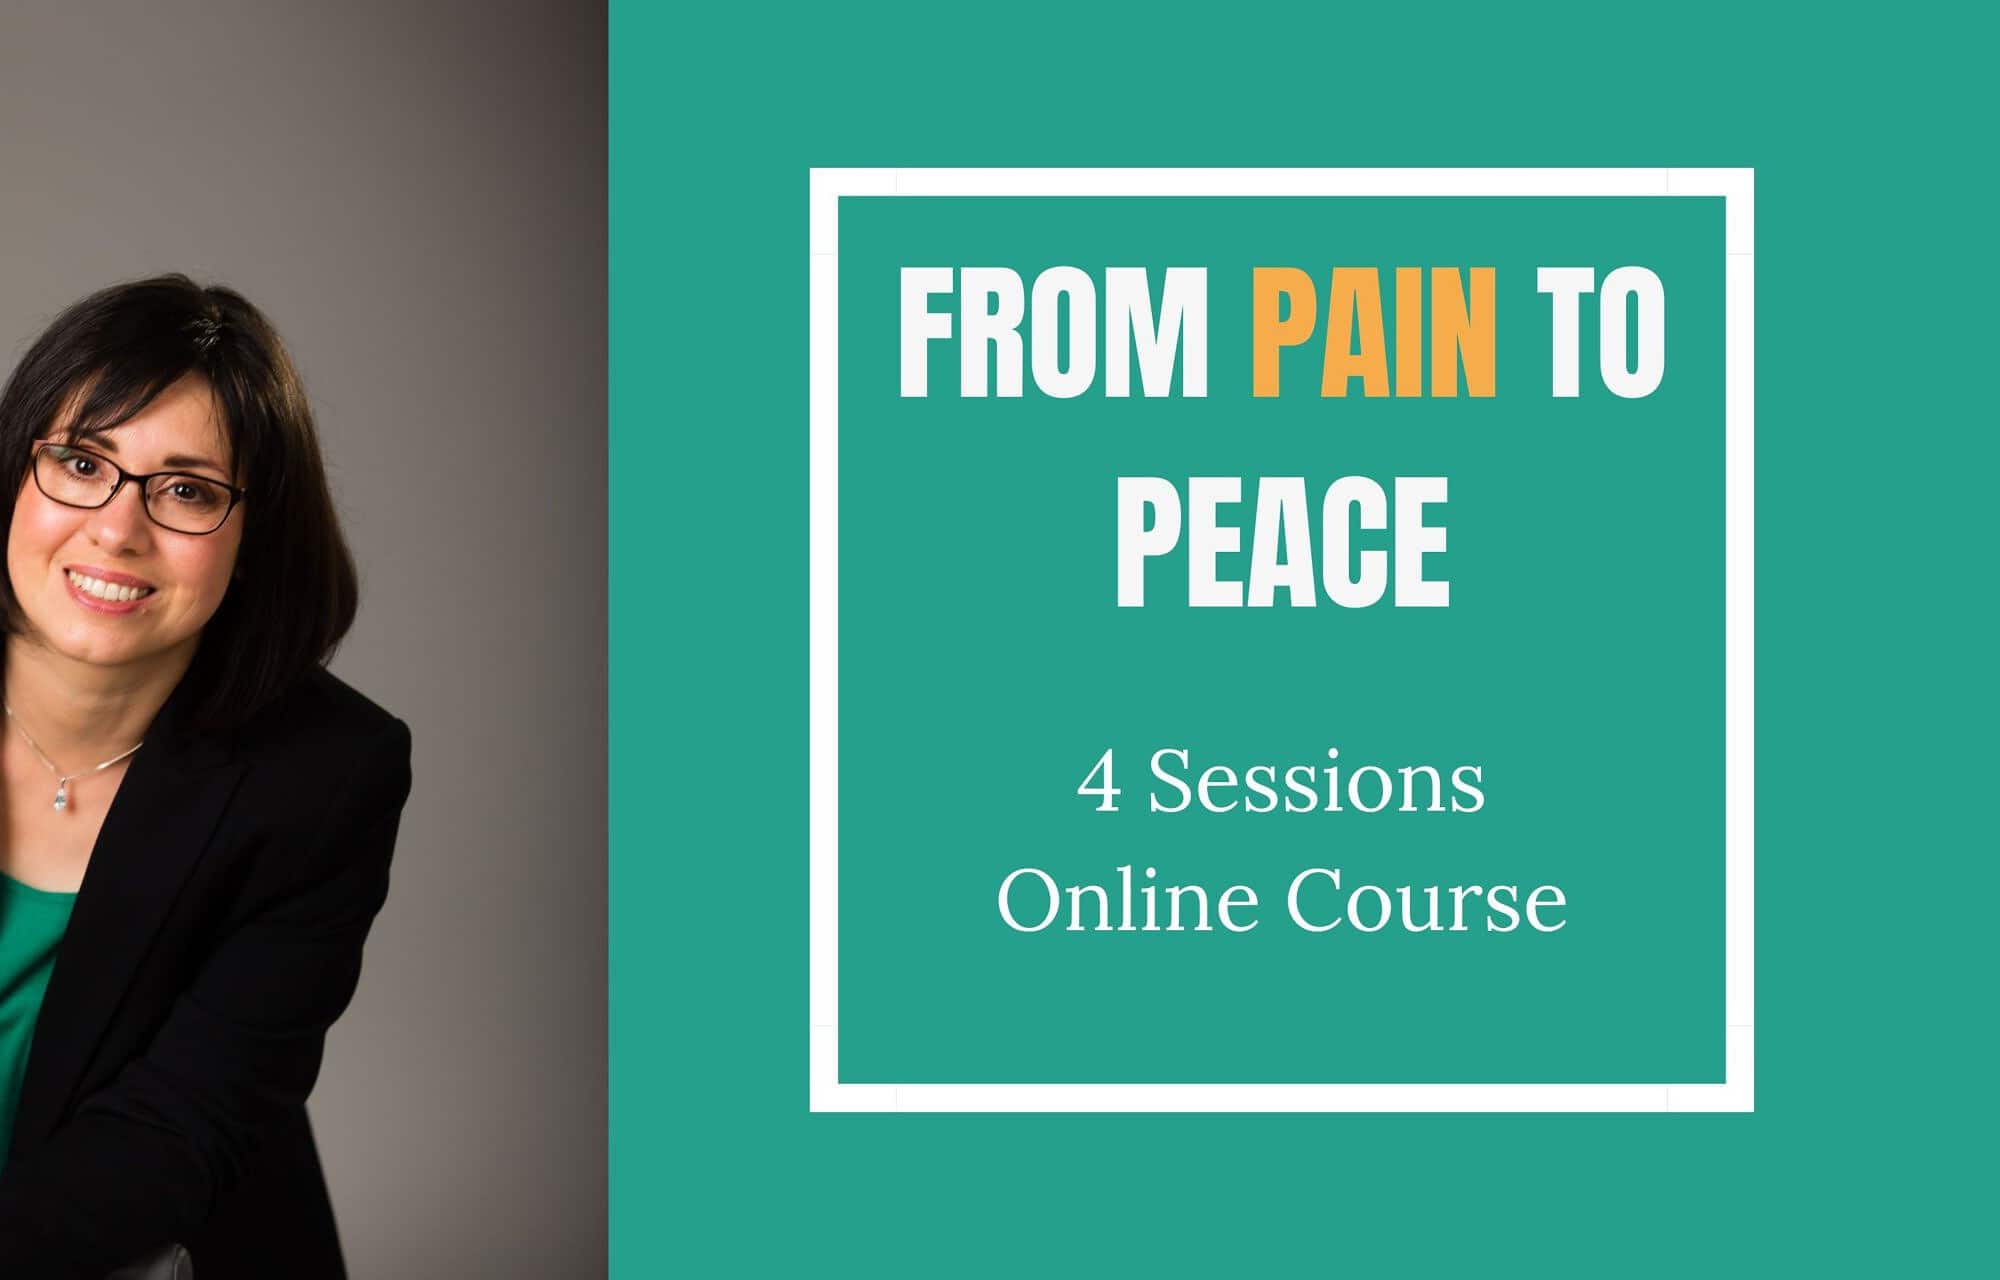 From Pain To Peace - What you're going to learn